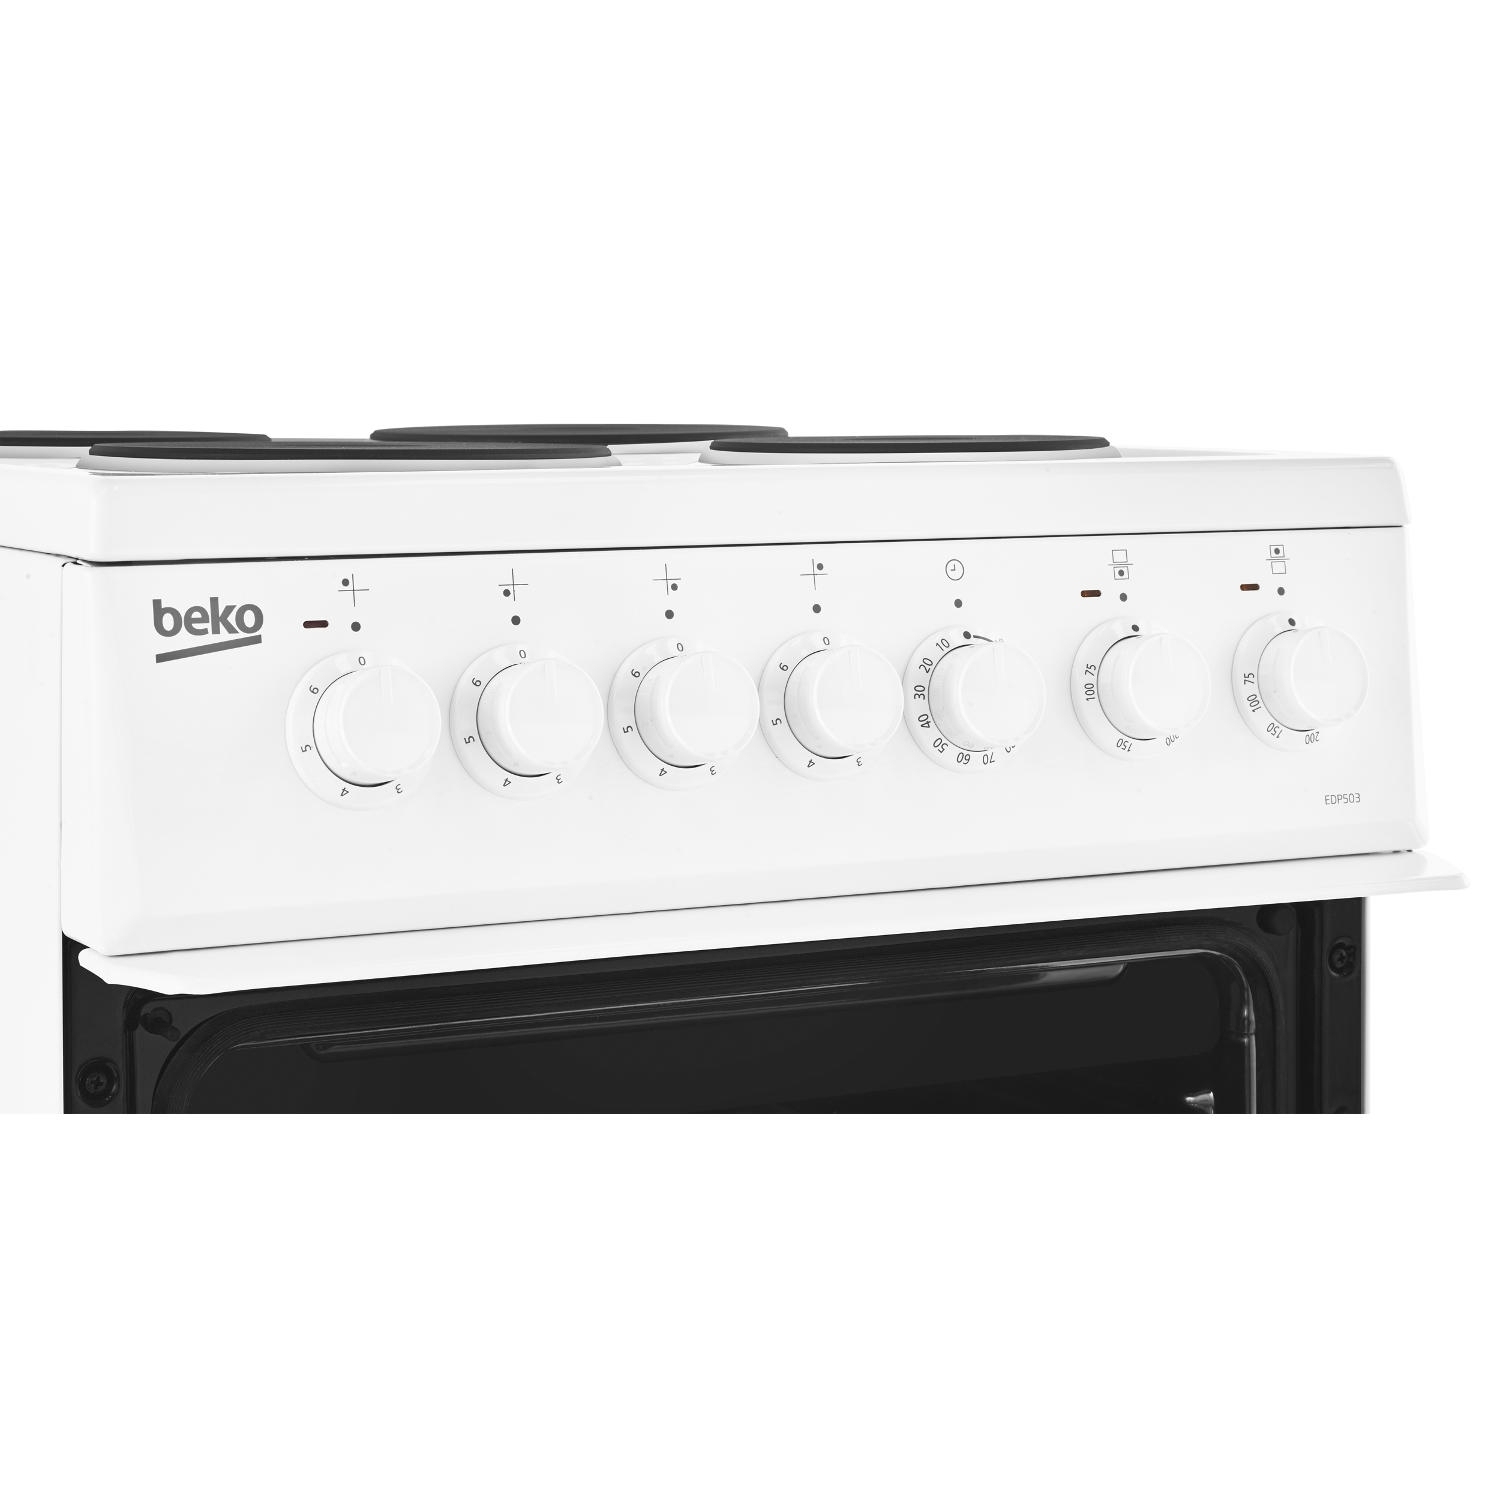 Beko EDP503W 50cm Electric Double Oven with Grill Cooker - White - 5